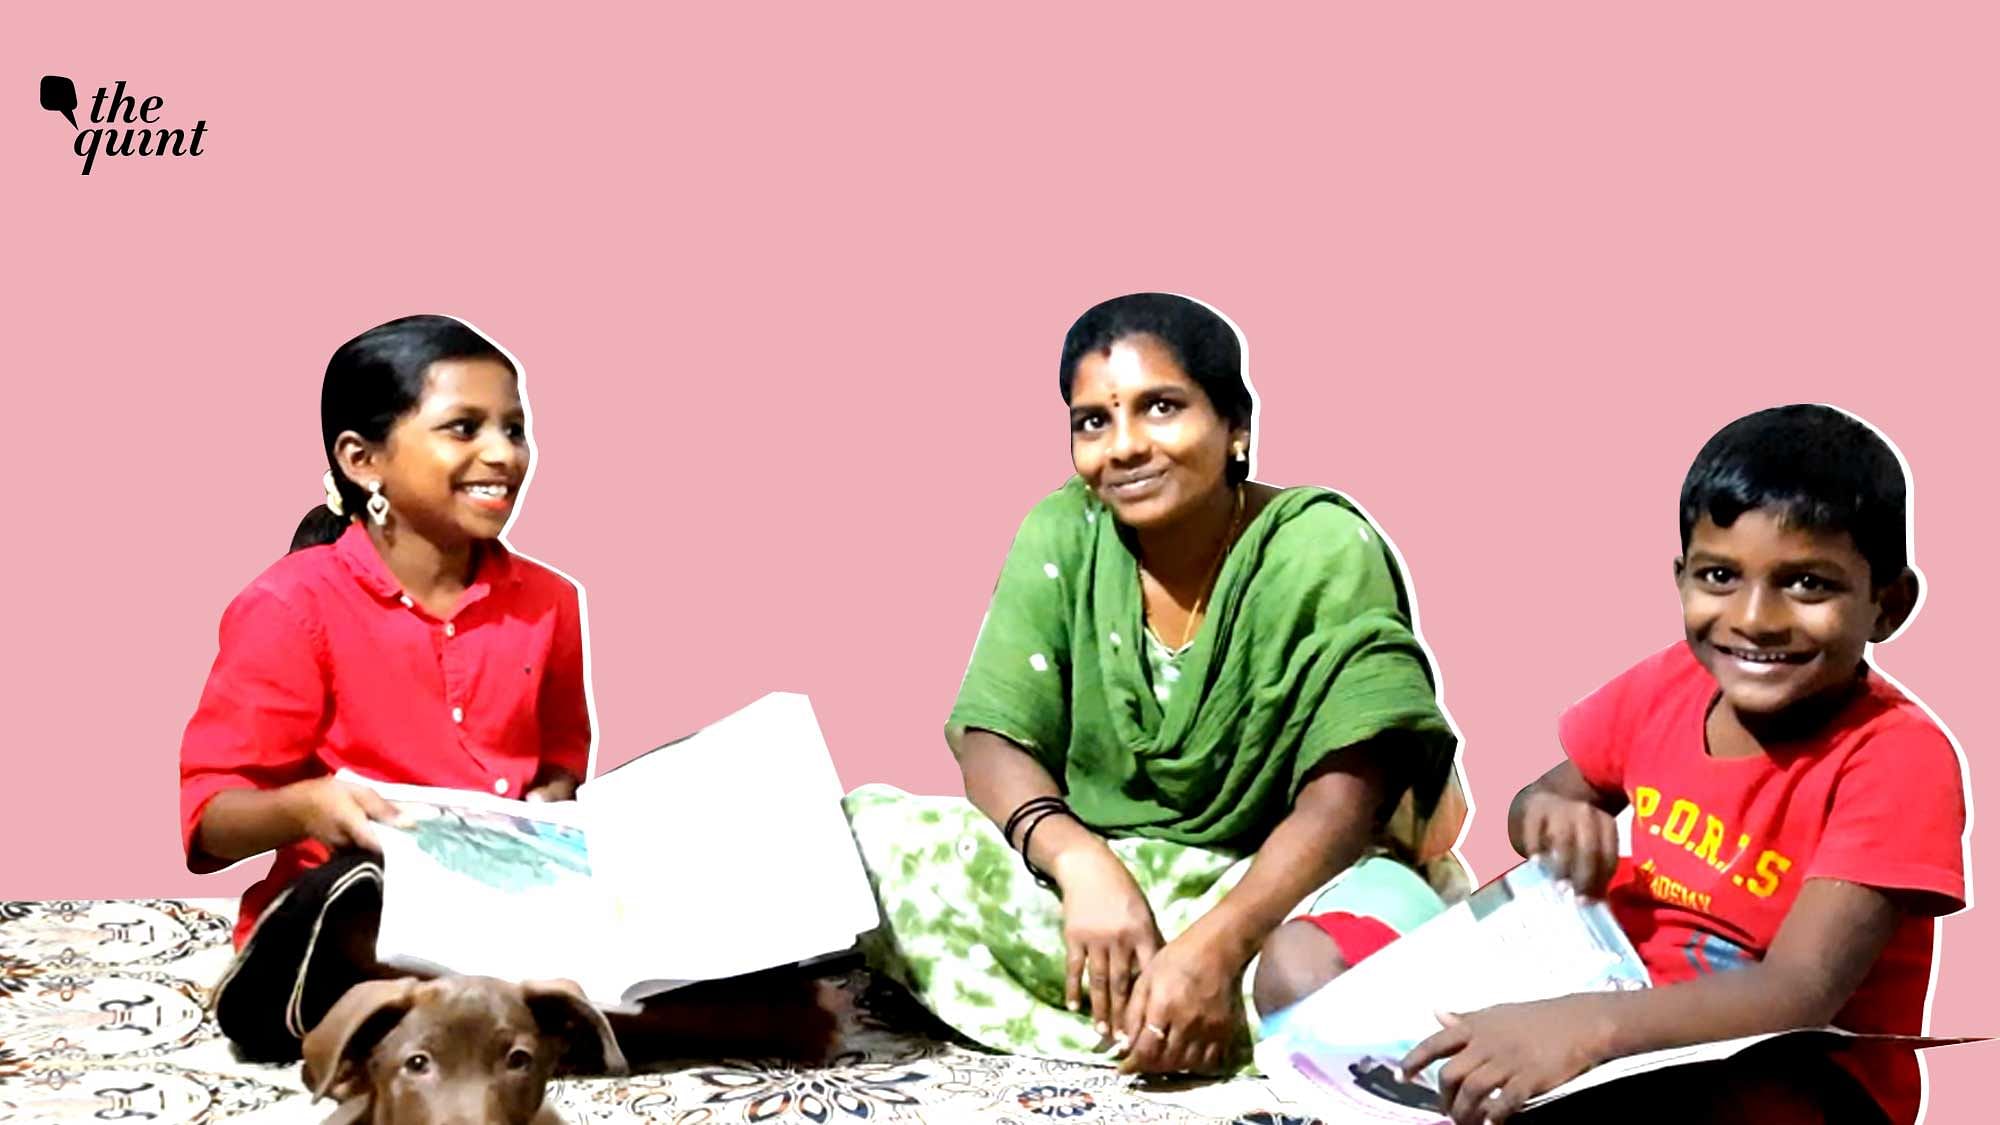 A 28-year-old Rathi is a domestic worker living in Chennai, Tamil Nadu, along with her husband and two kids – 8-year-old Rakesh and 10-year-old Lakshyasree.